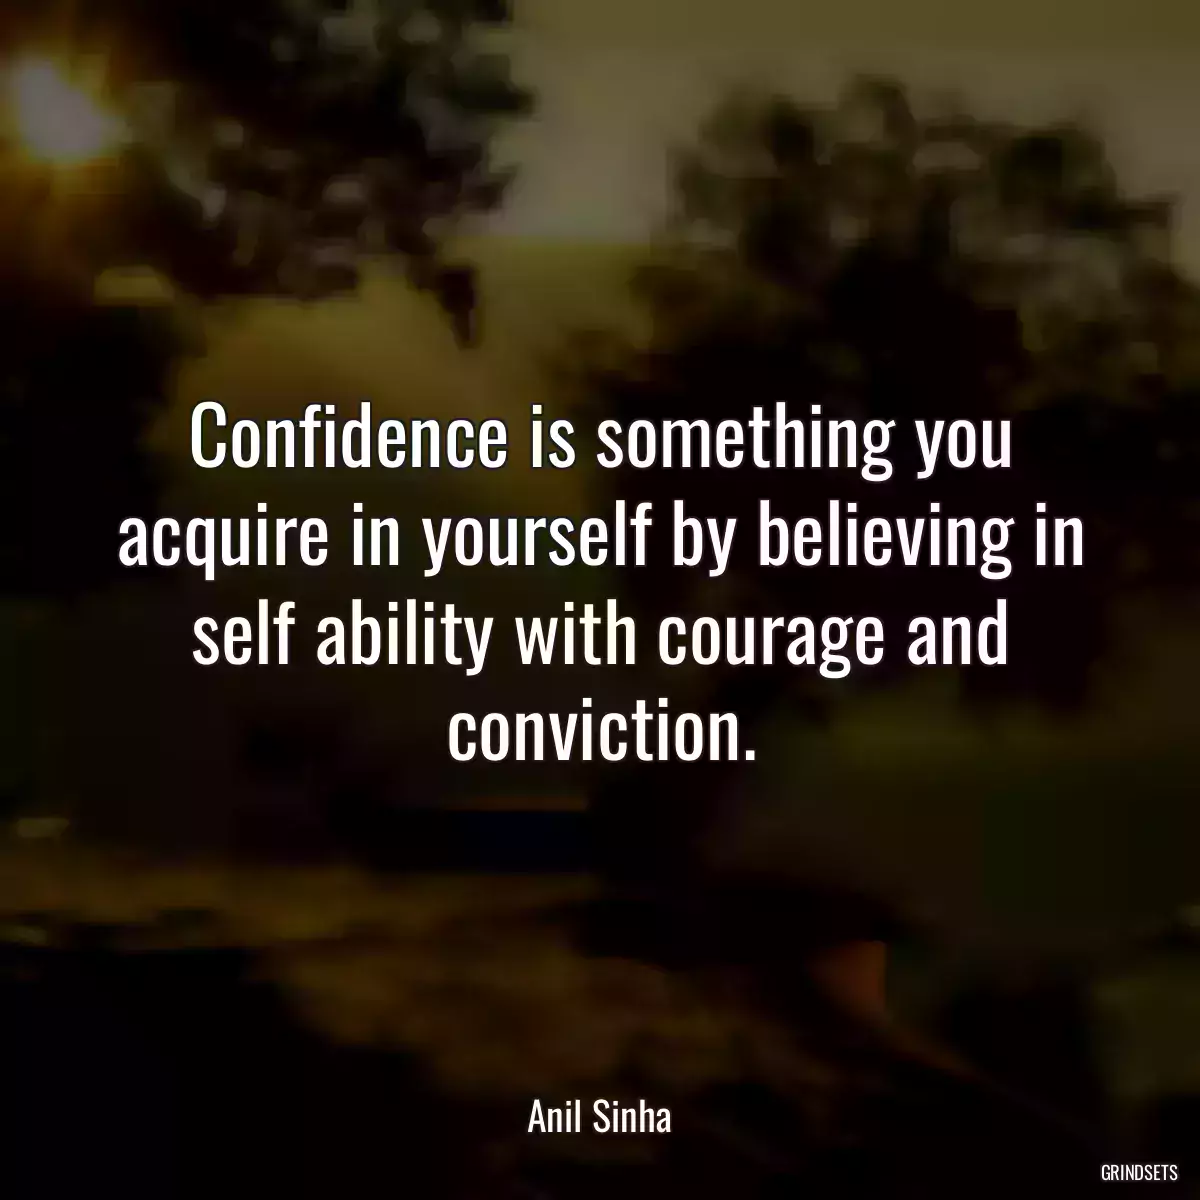 Confidence is something you acquire in yourself by believing in self ability with courage and conviction.